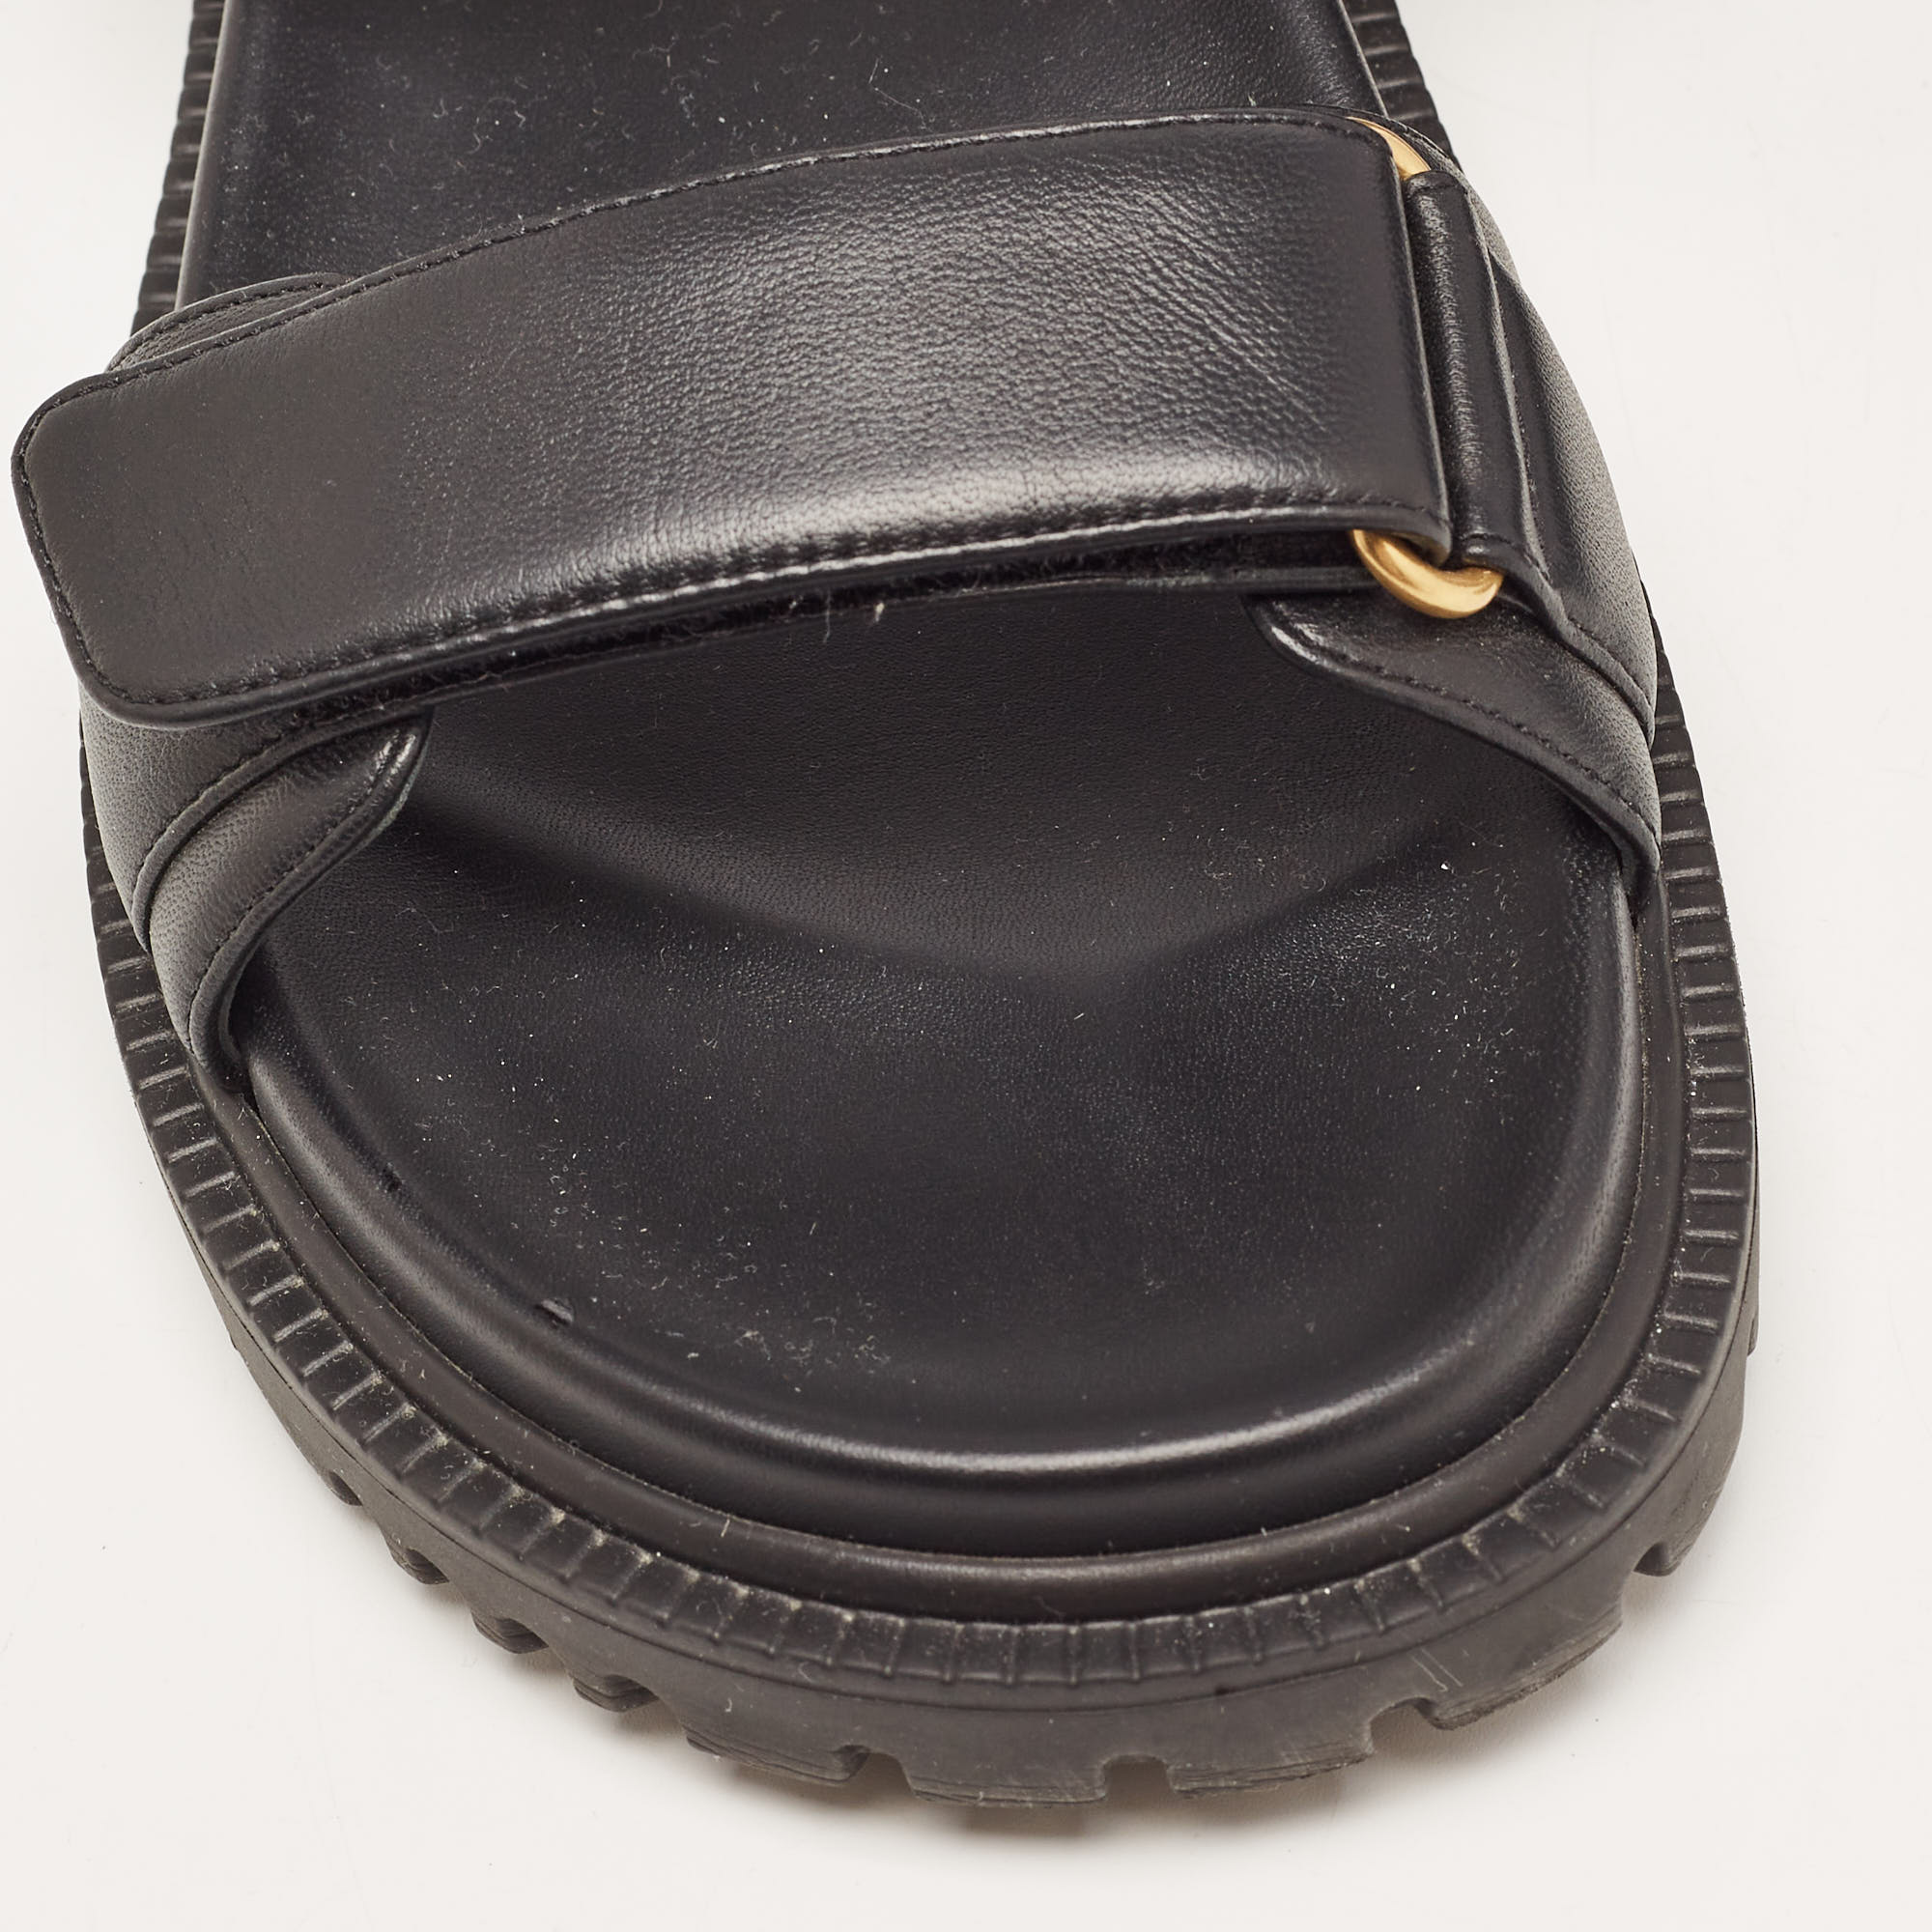 Dior Black Leather DiorAct Slingback Sandals Size 39.5